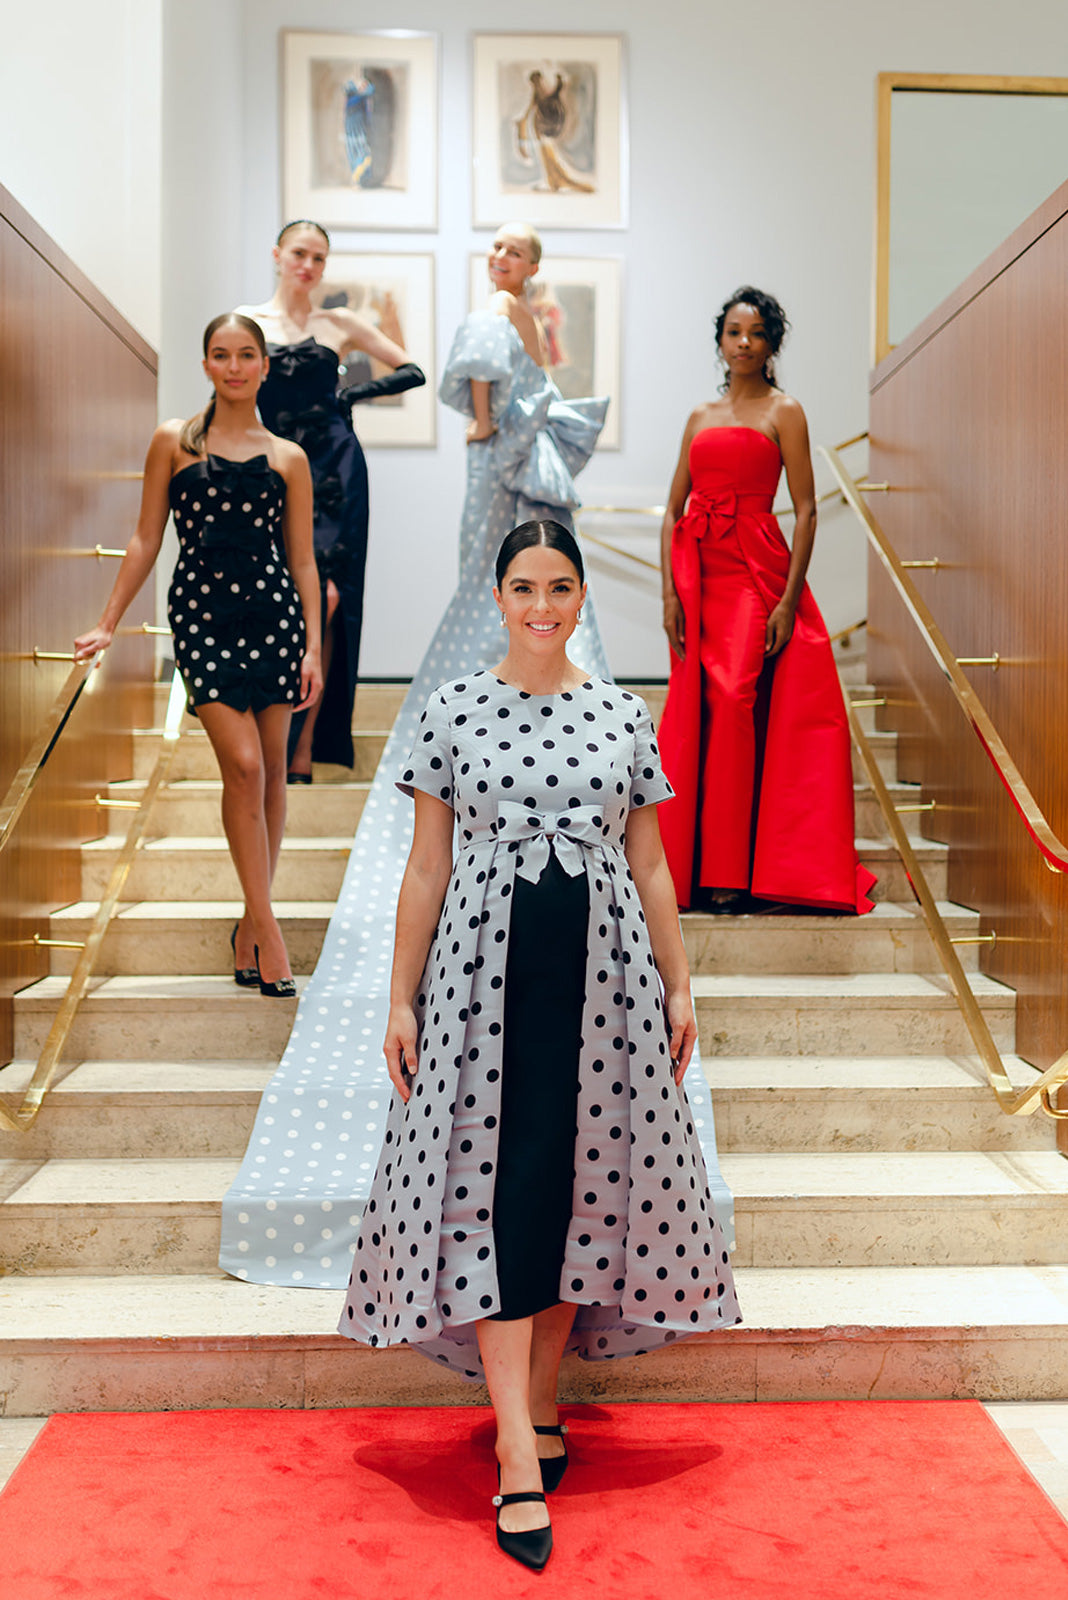 A Night Of Glamour With Neiman Marcus